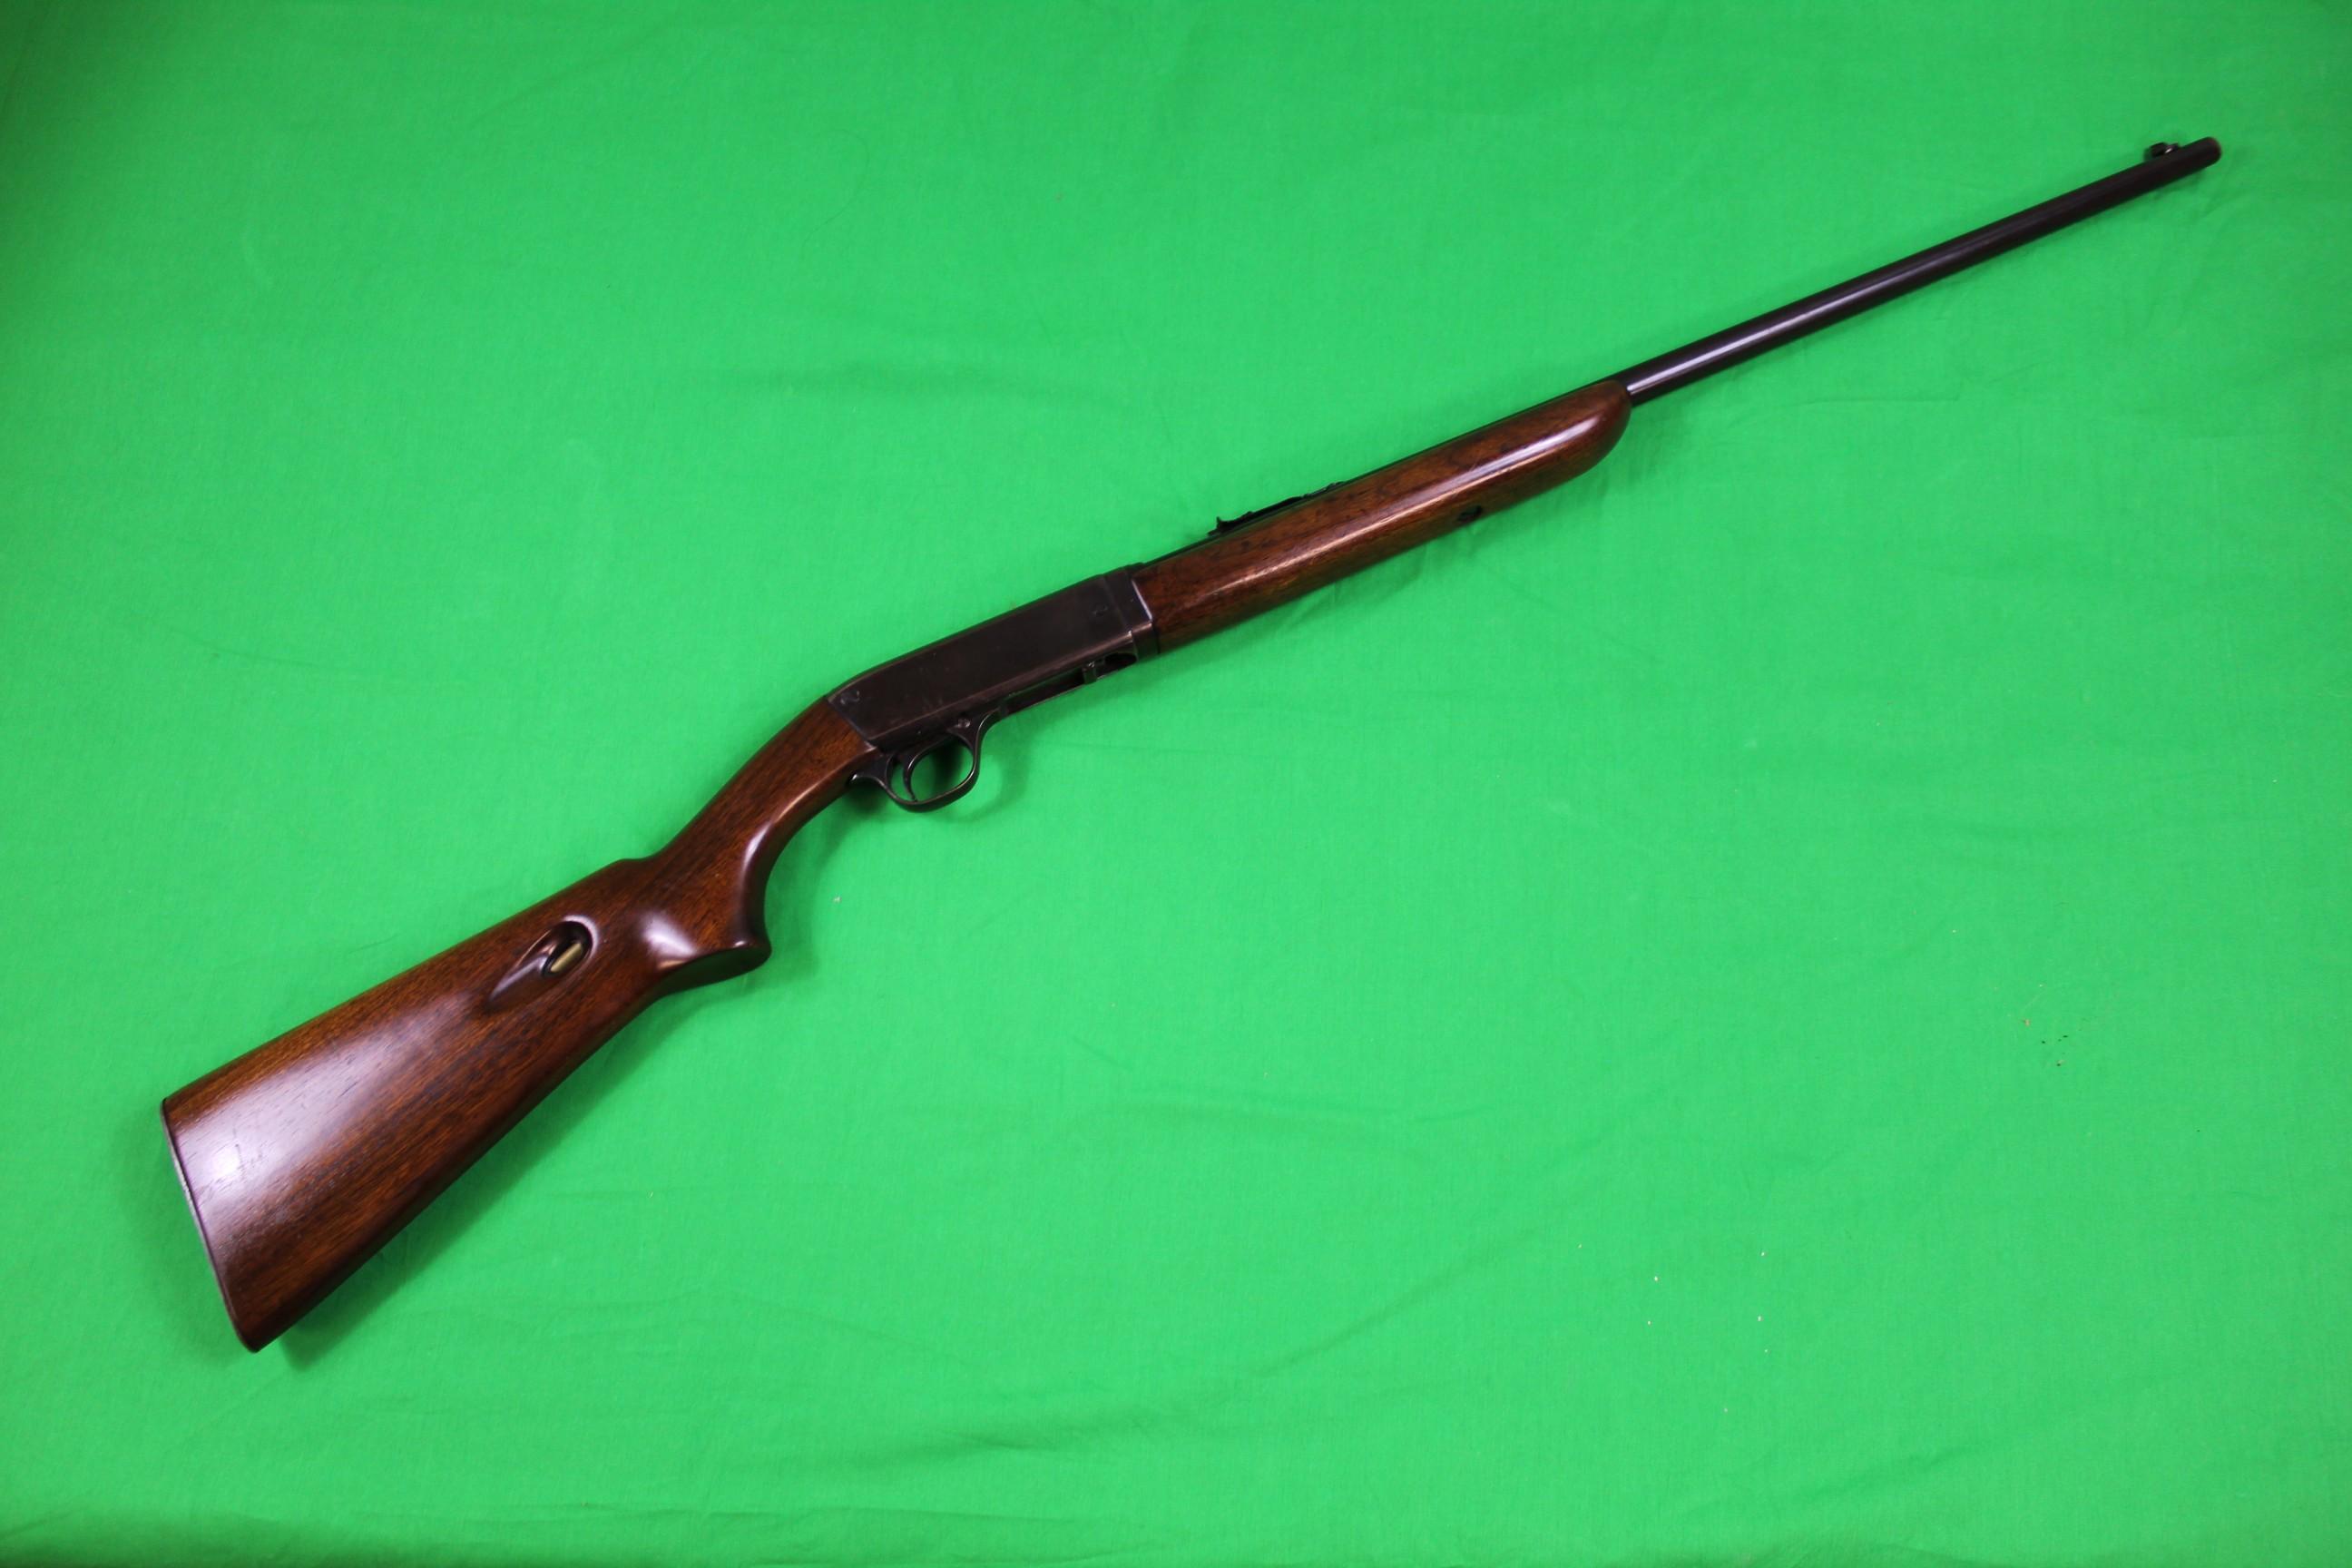 Remington 241 Speedmaster, 22LR, s/n 9565.  This is Remington’s equal to th